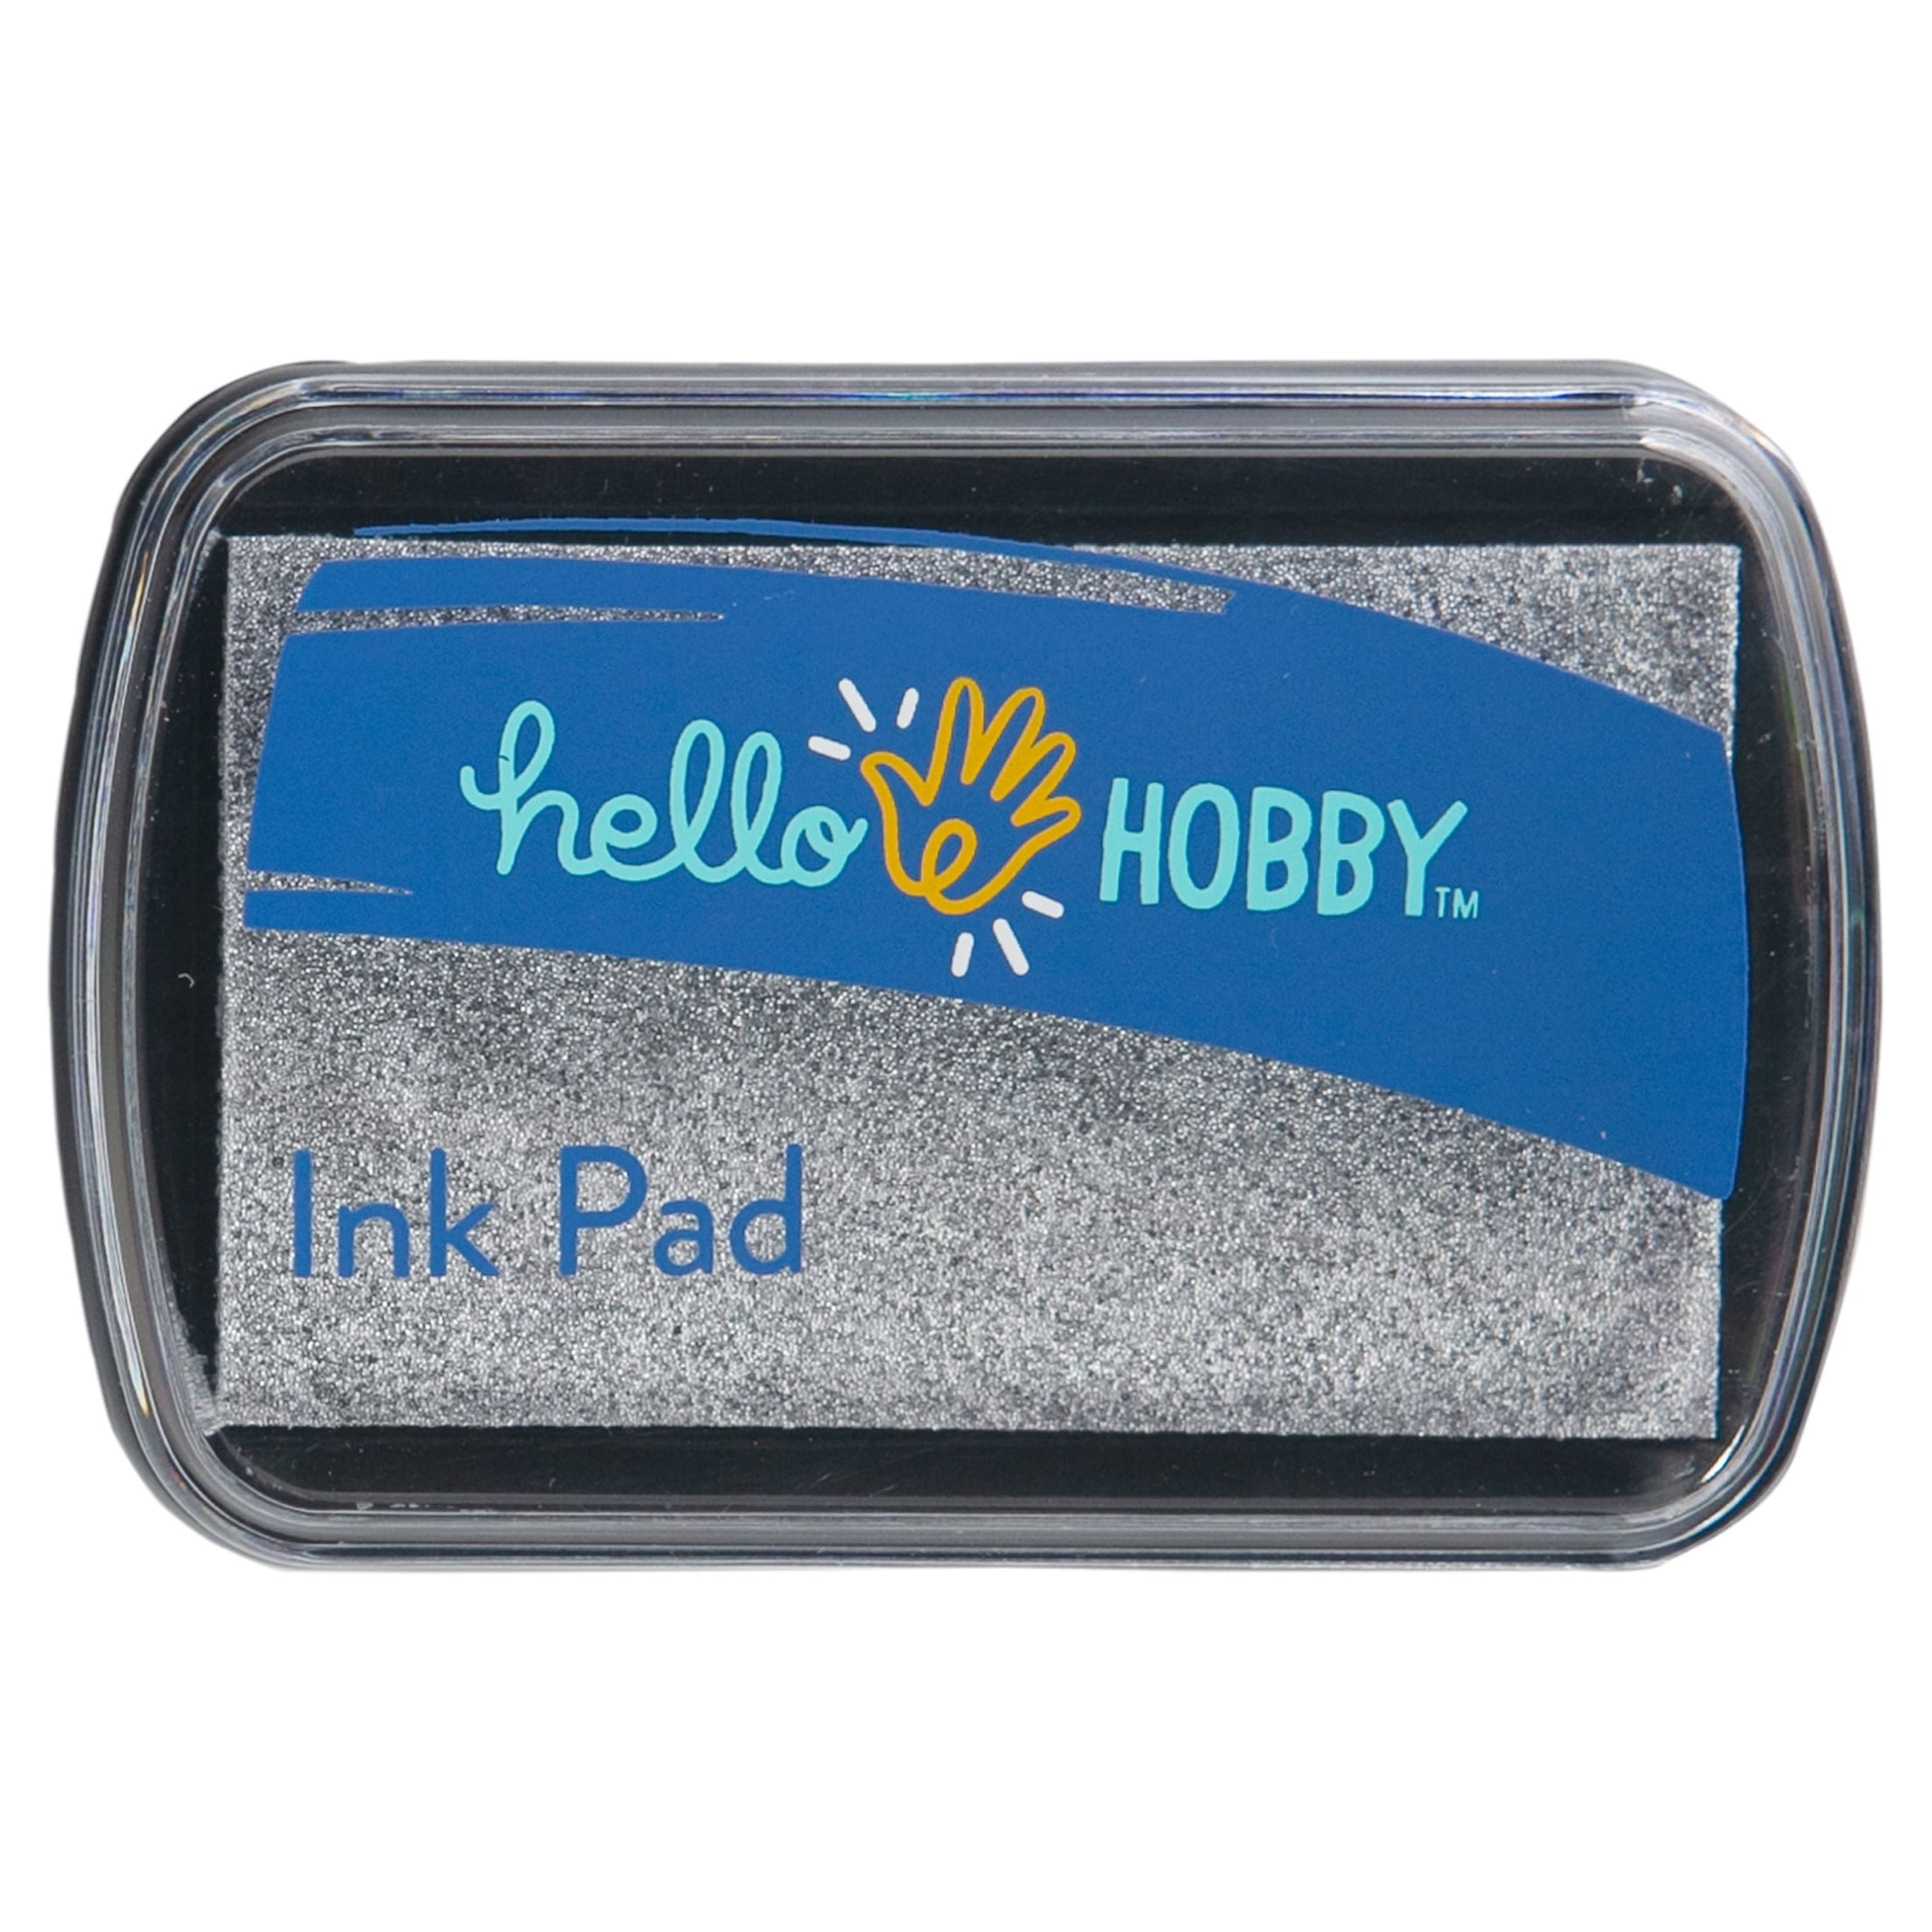 Hello Hobby Ink Pad for Stamping, Silver Metallic